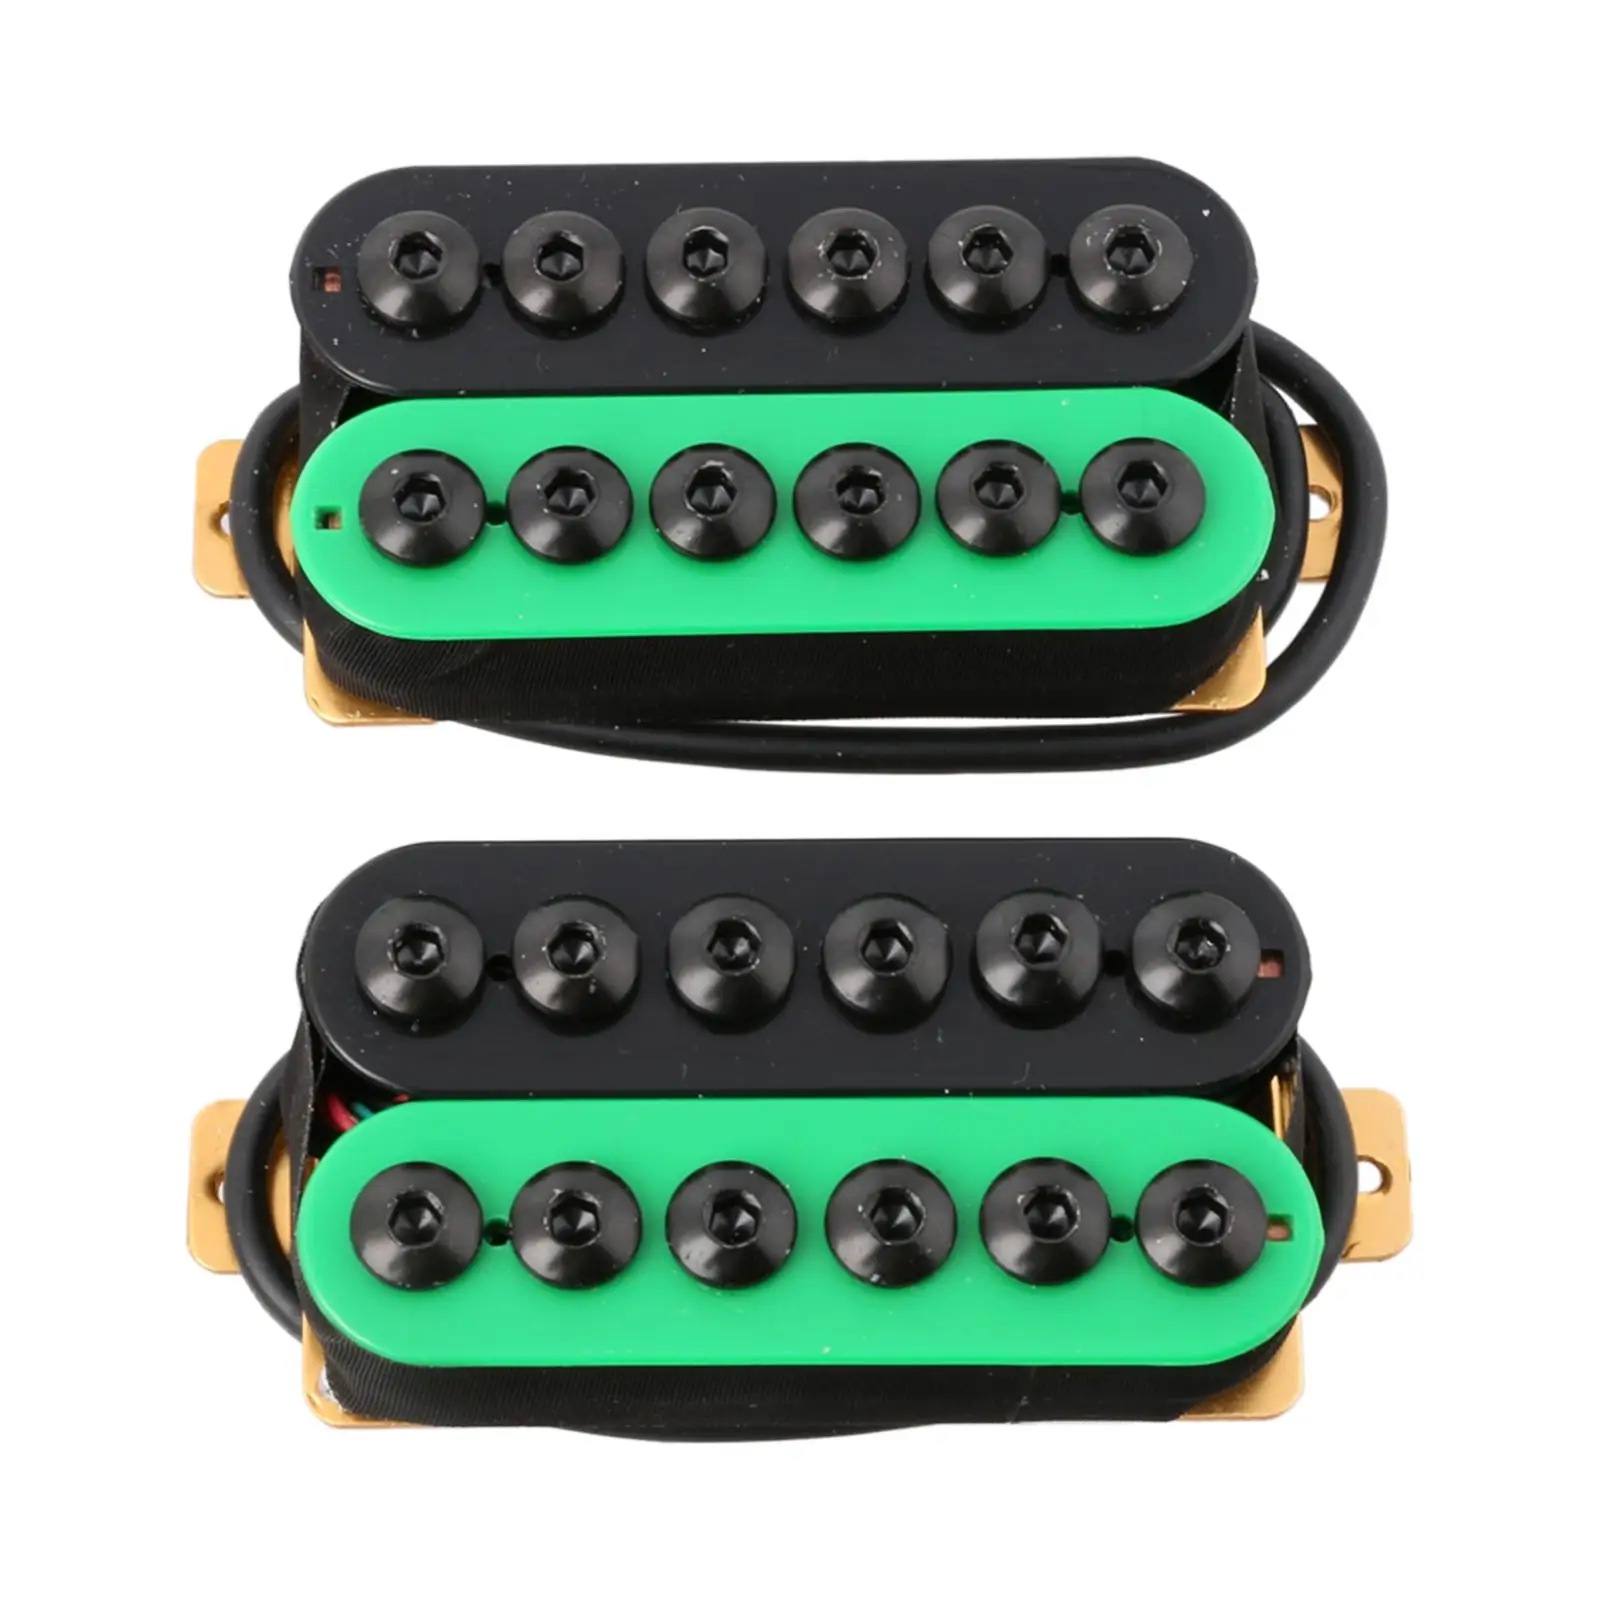 

2pcs durable humbucker pickup, direct replacement for guitar parts made of